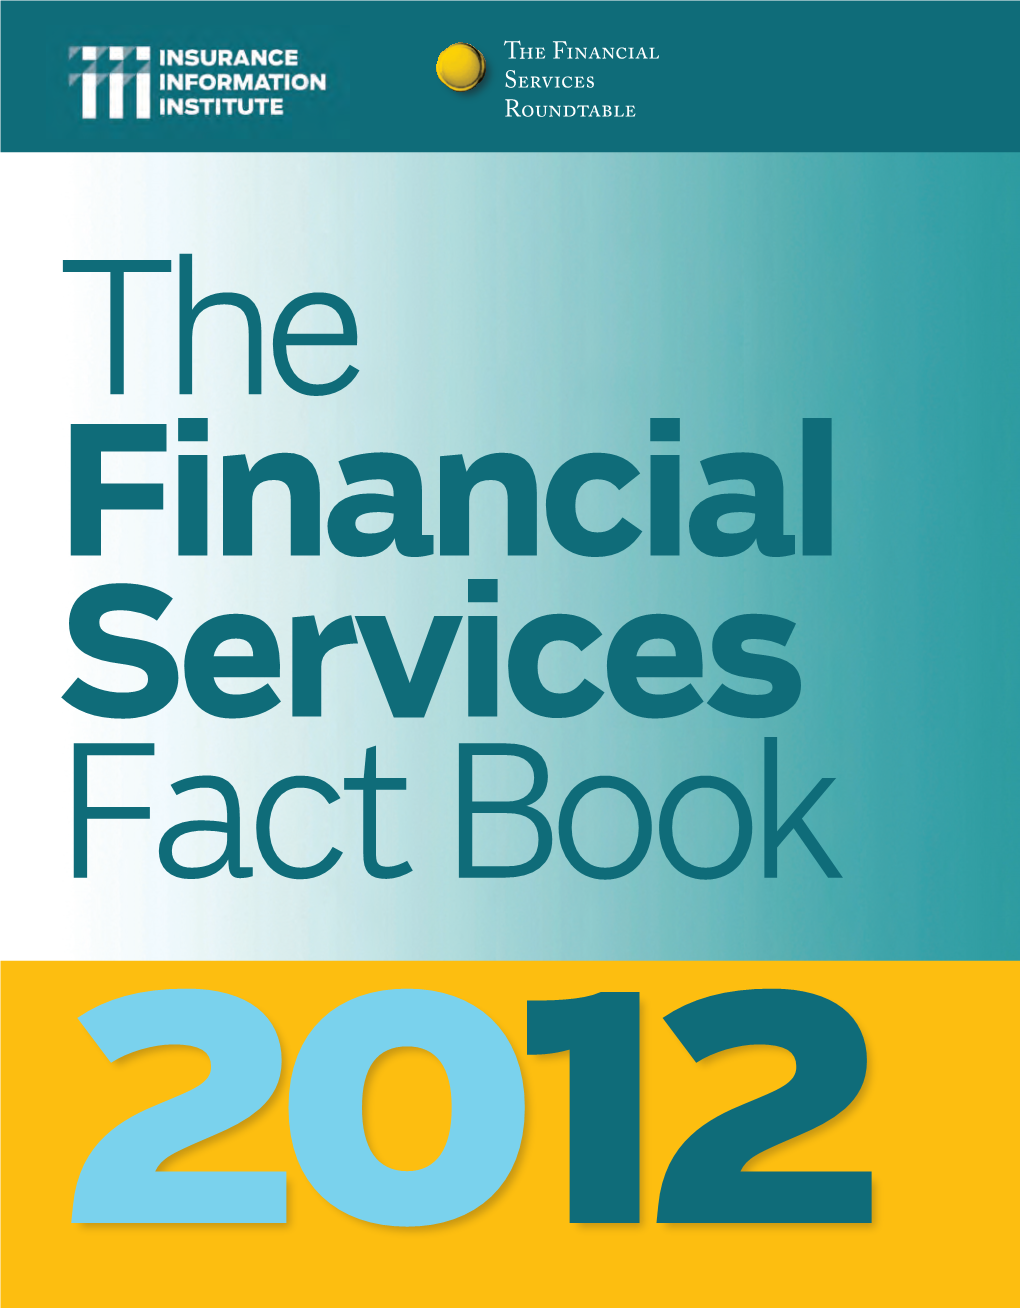 Financial Services Roundtable